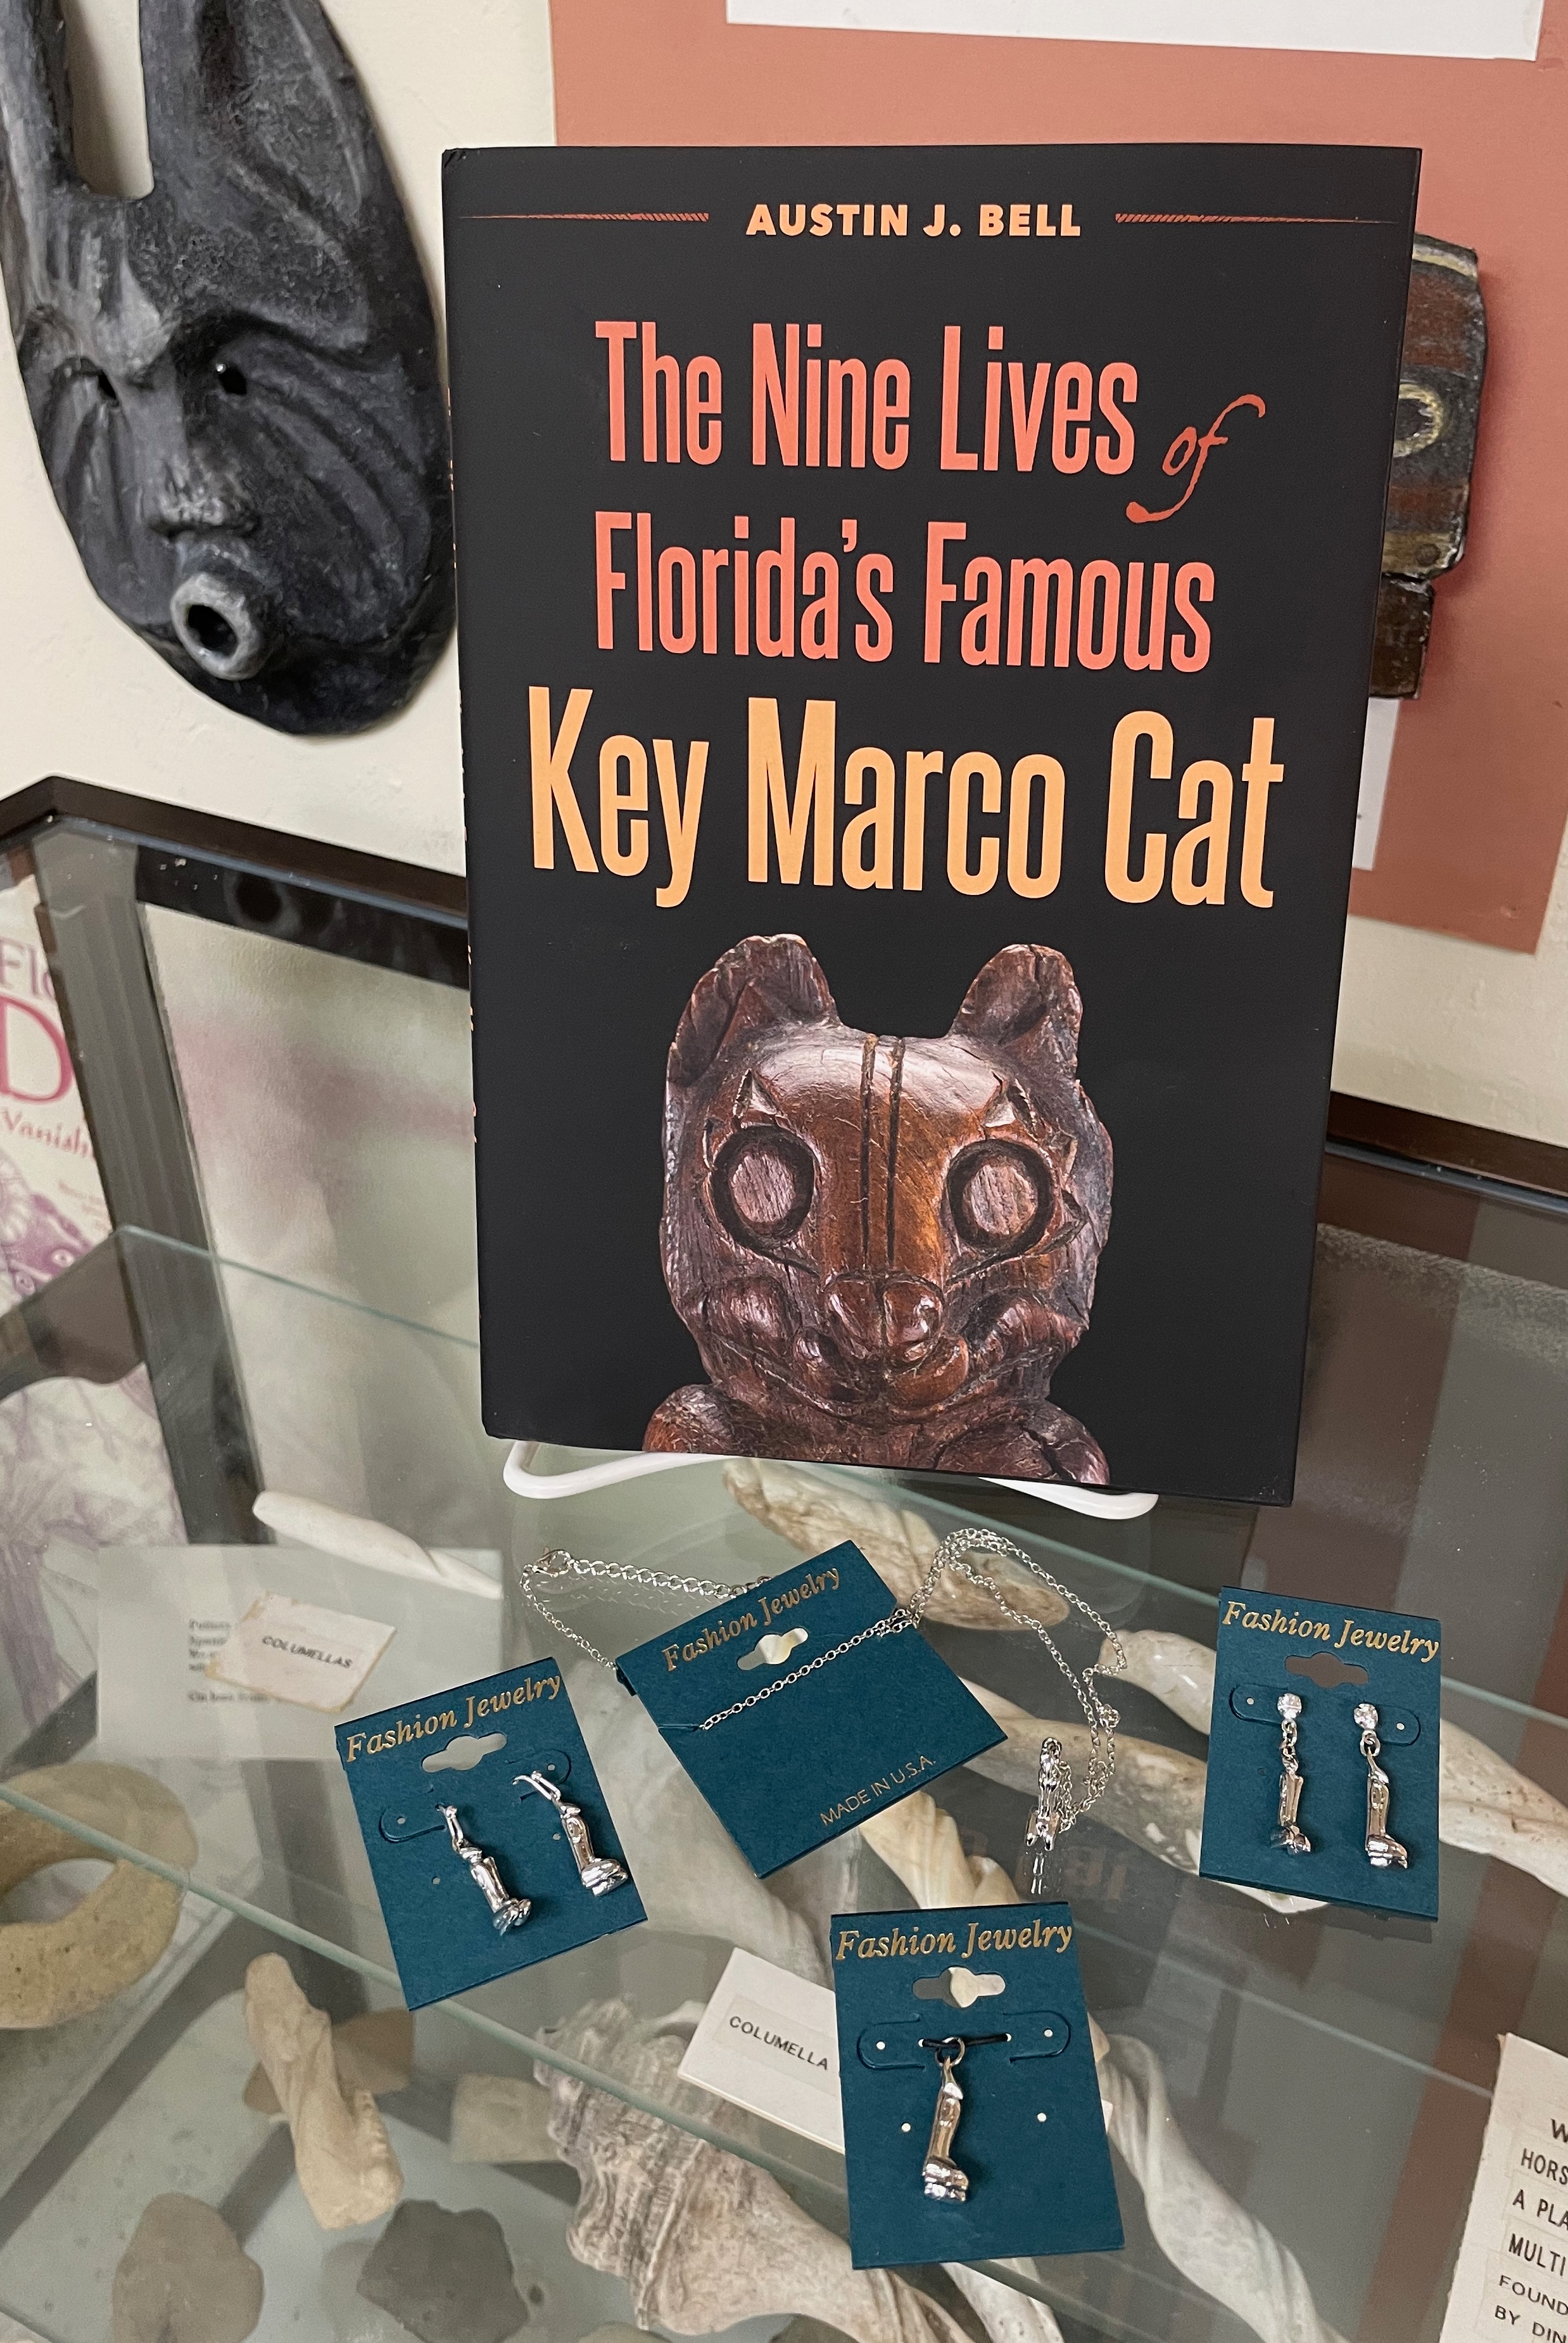 Key Marco Cat books and Jewelry